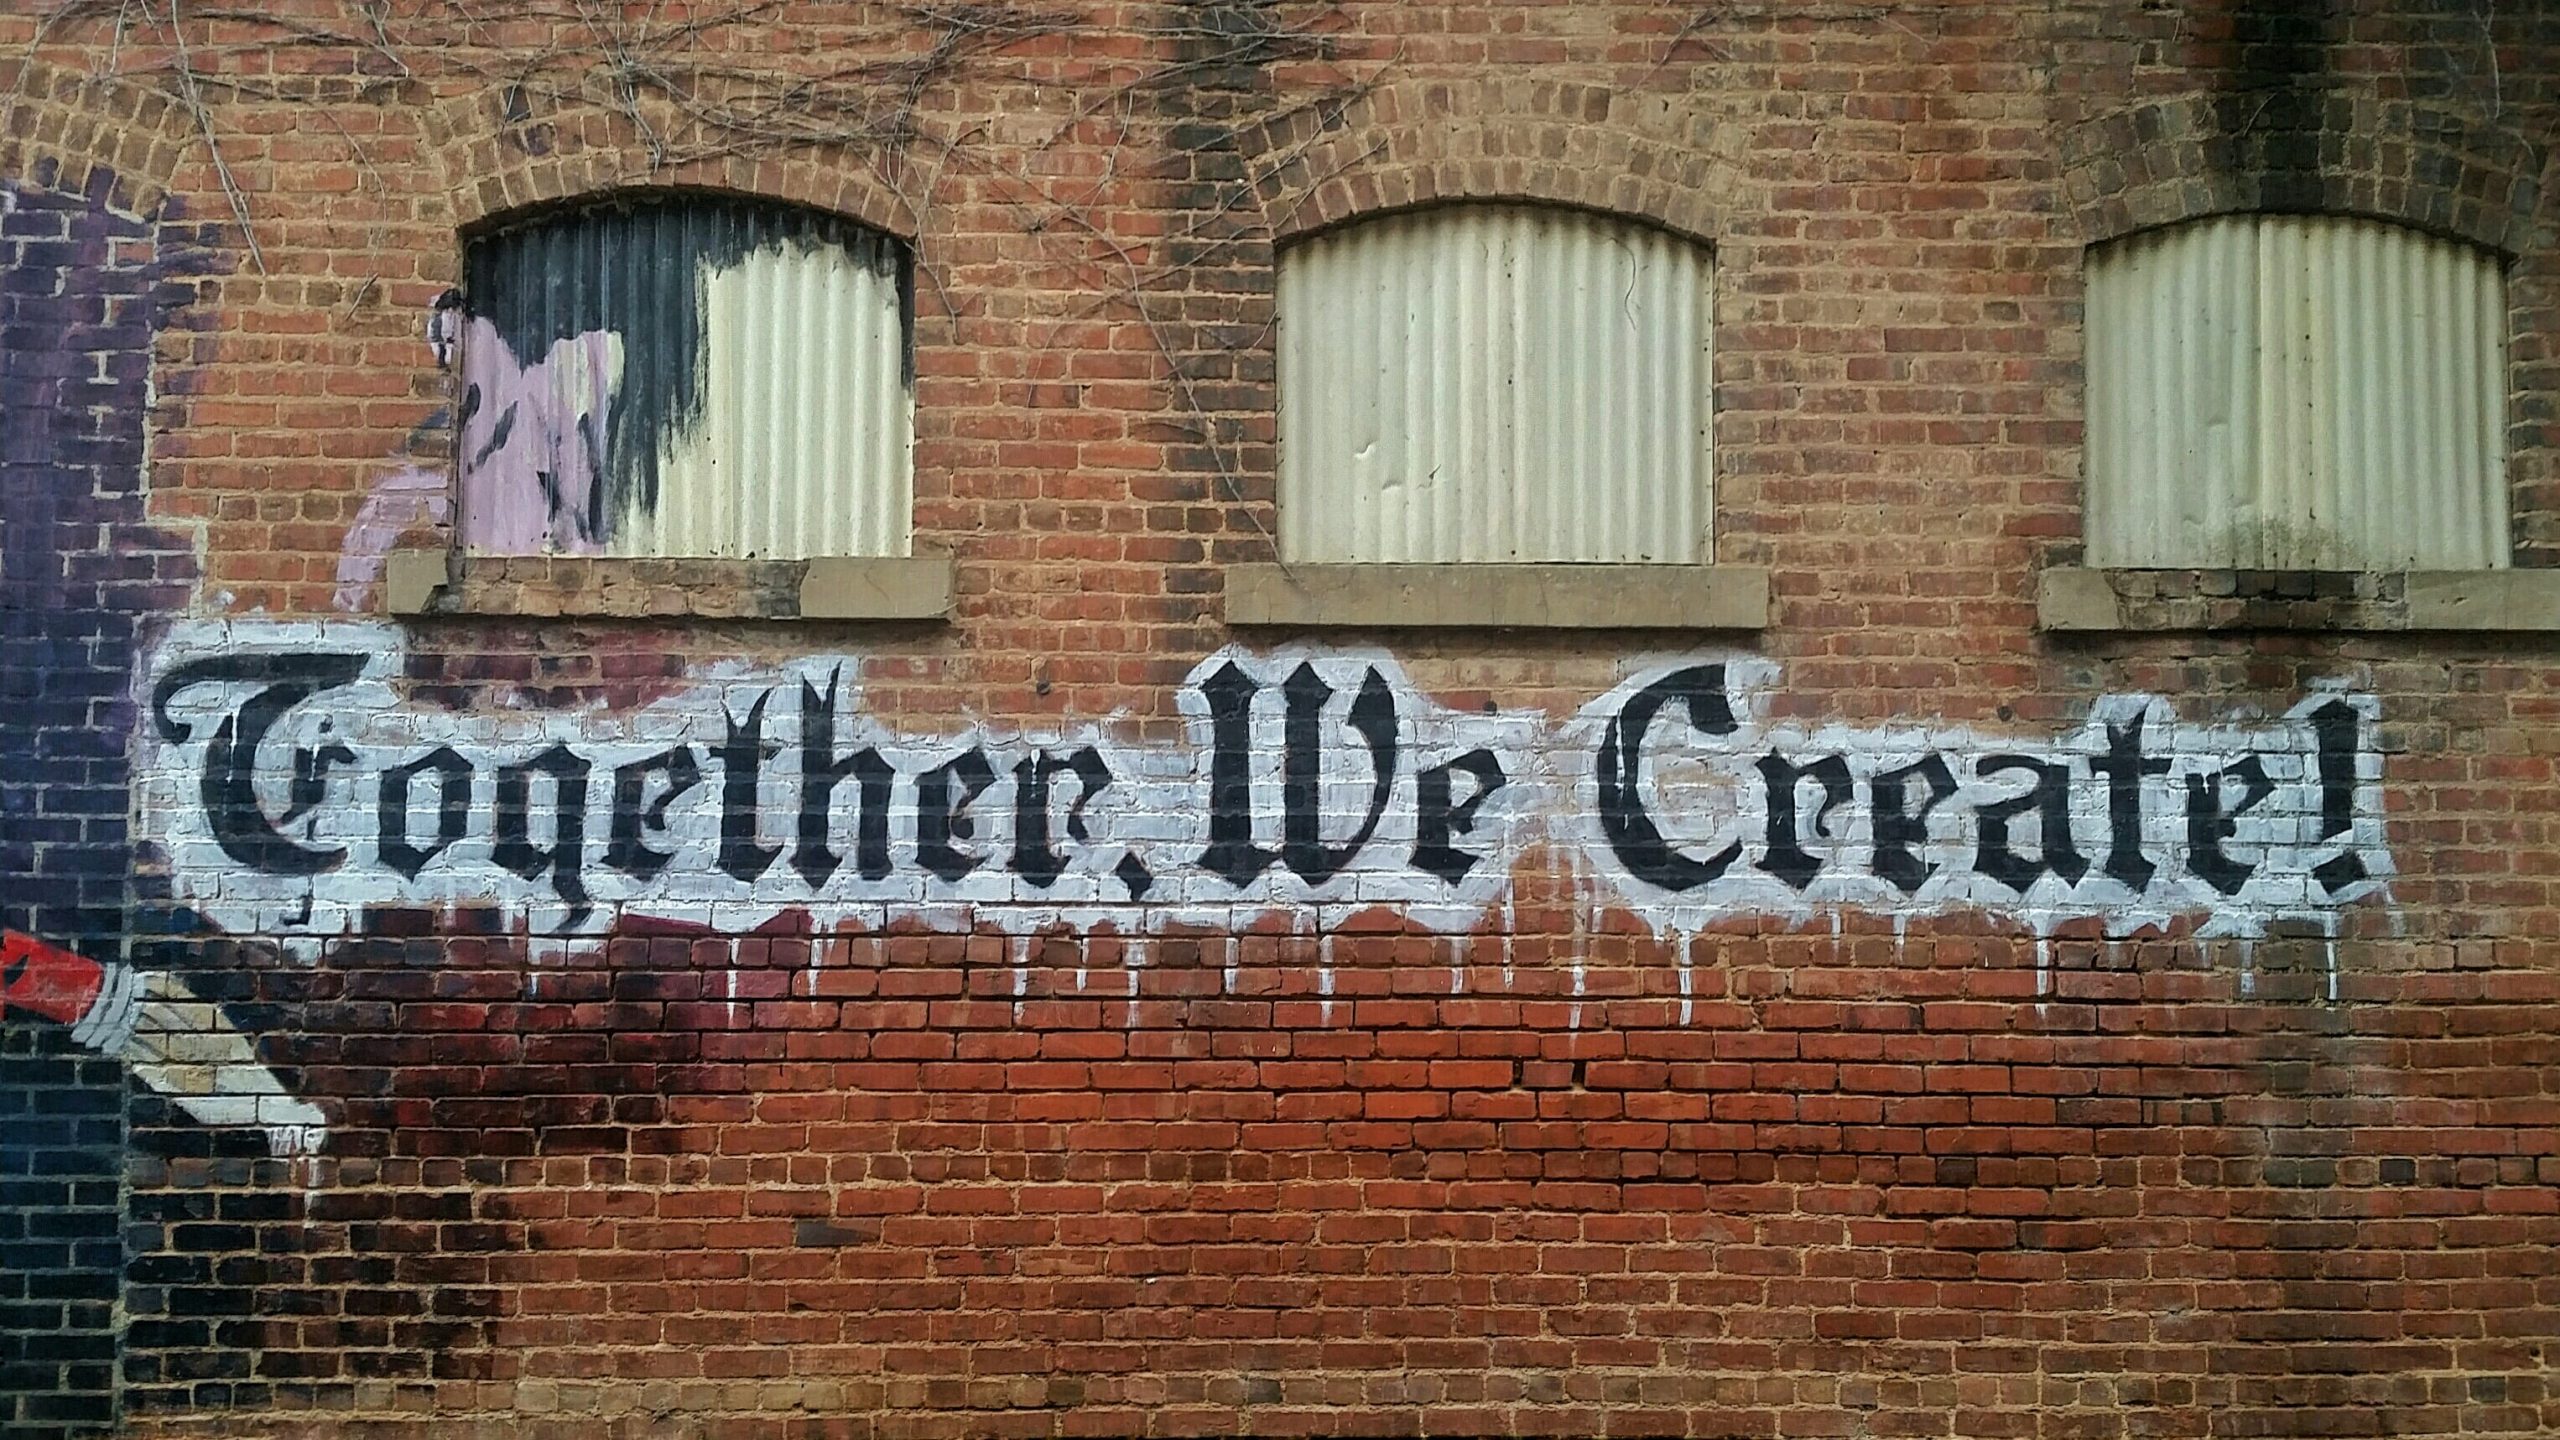 "Together We Create" painted on a brick wall